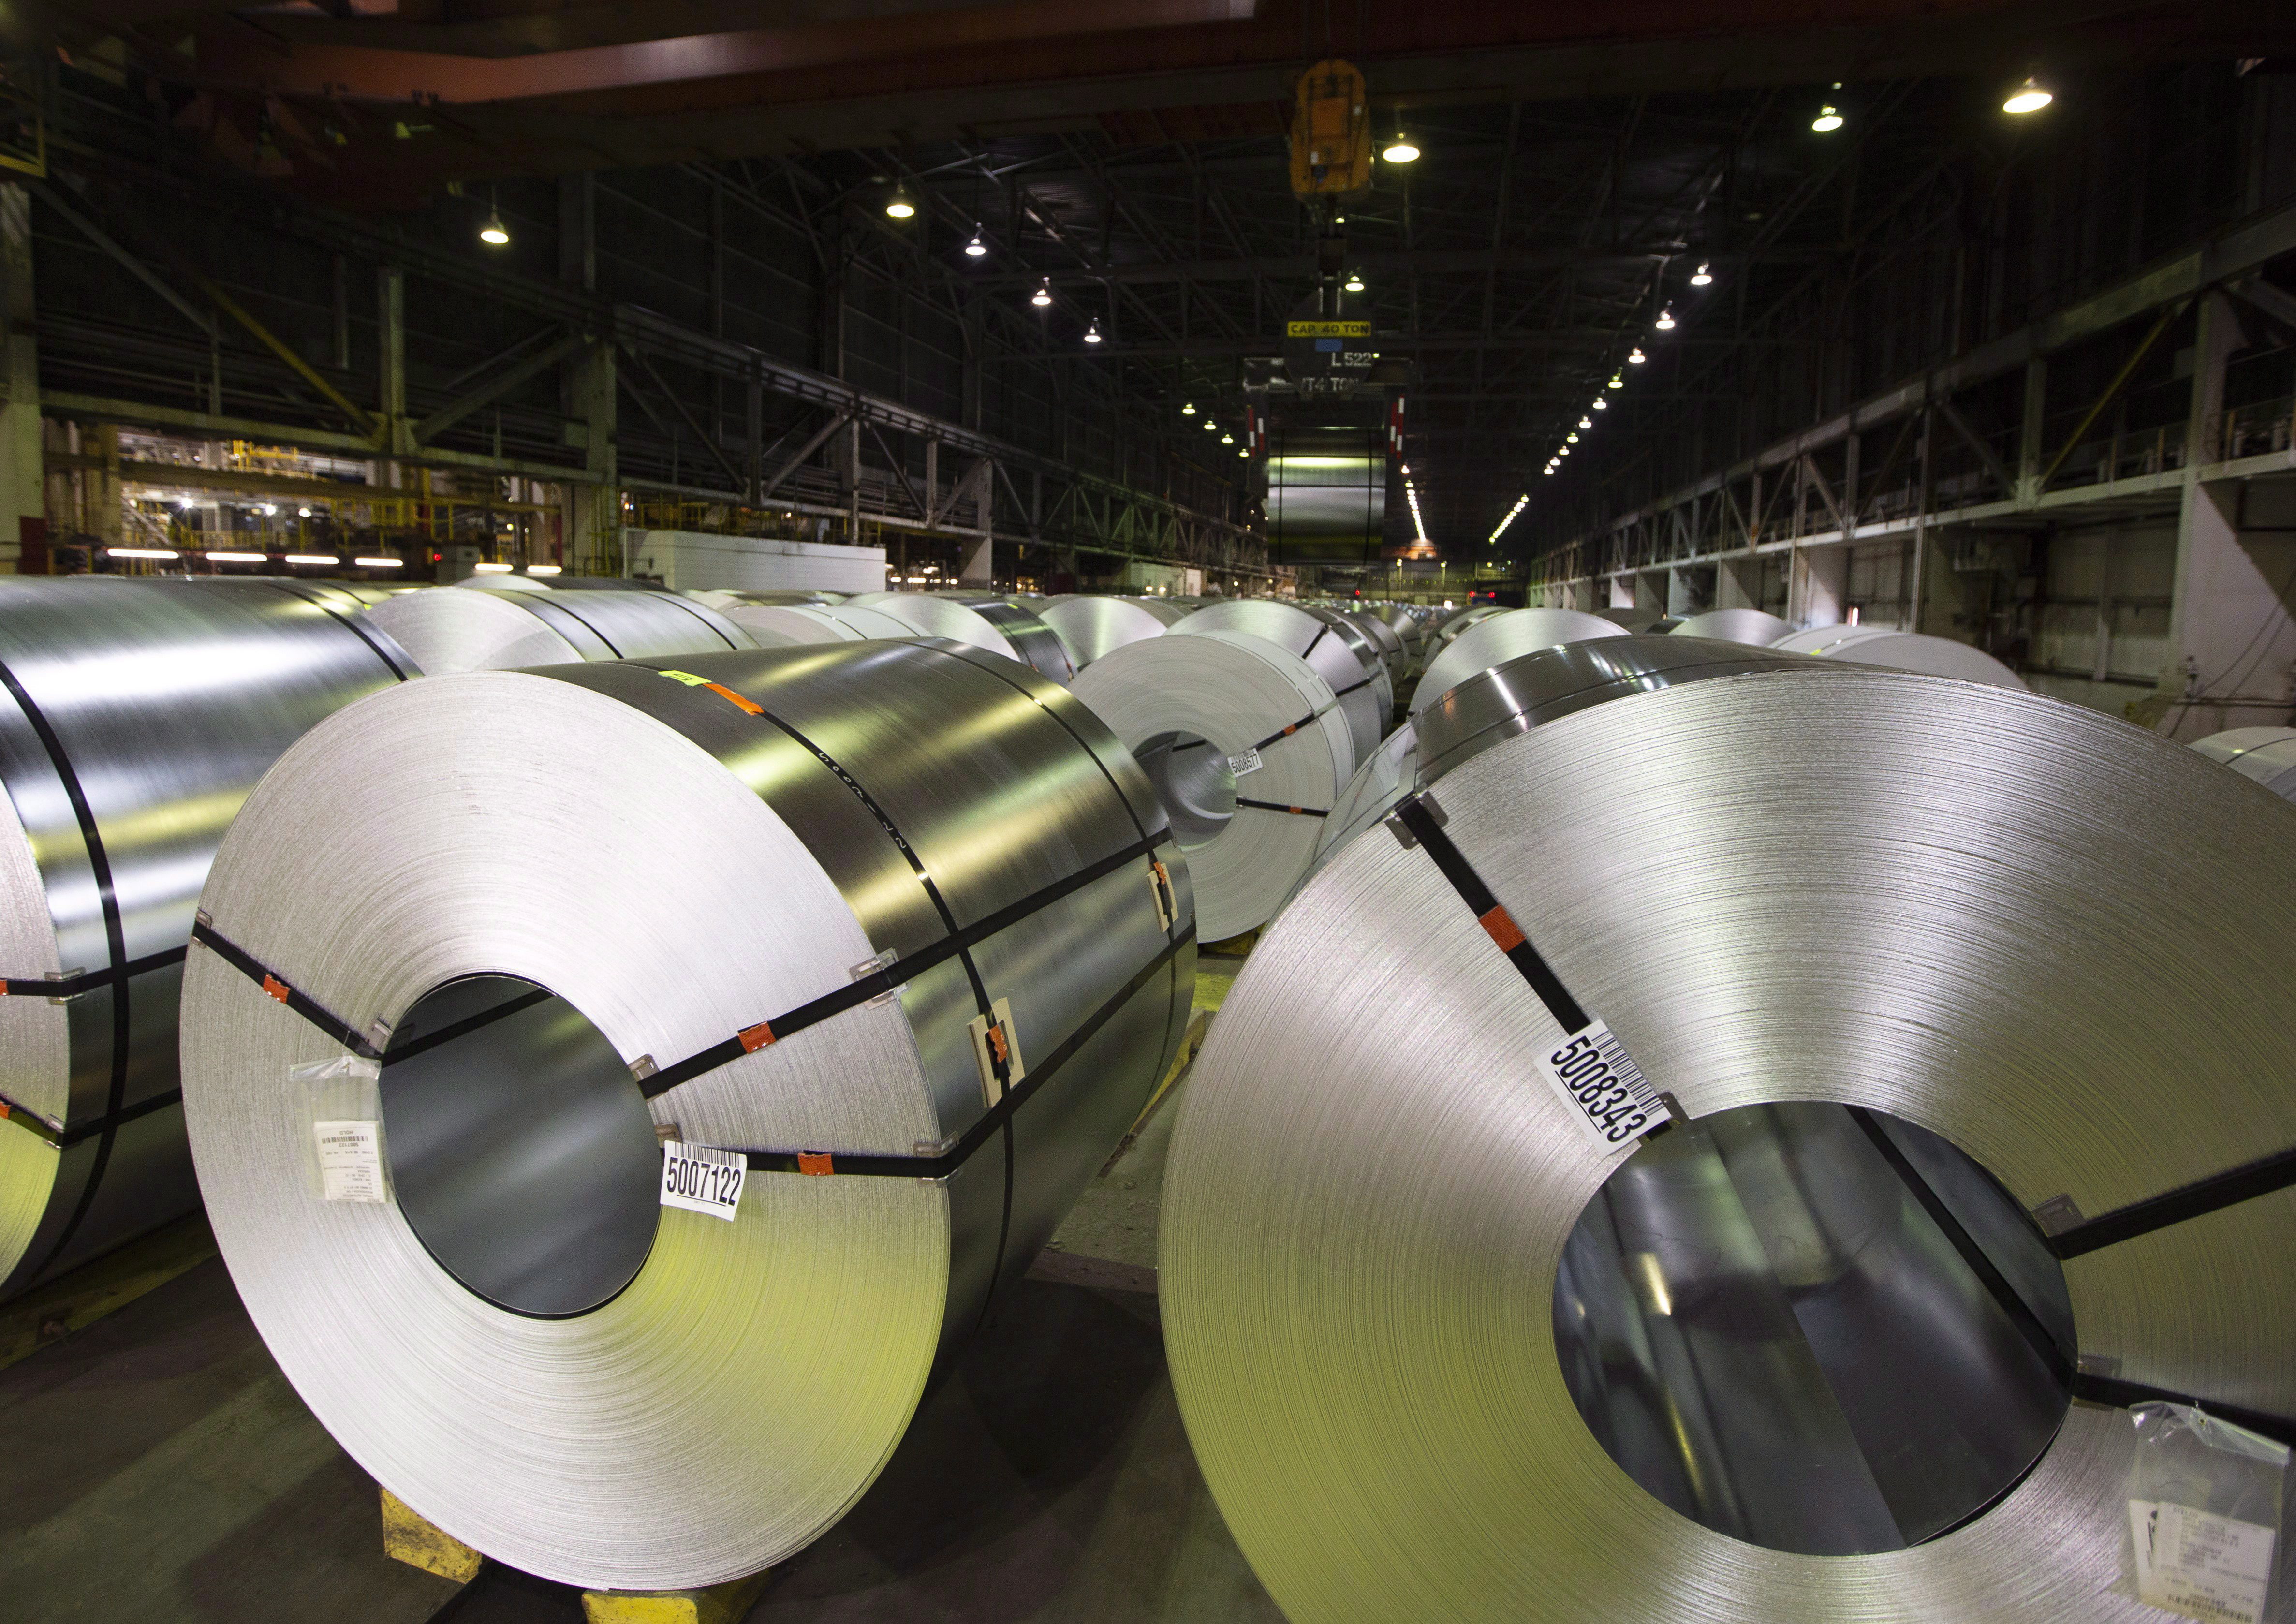 Hamilton steel maker Stelco Holdings sold to Cleveland-Cliffs for $3.4 billion